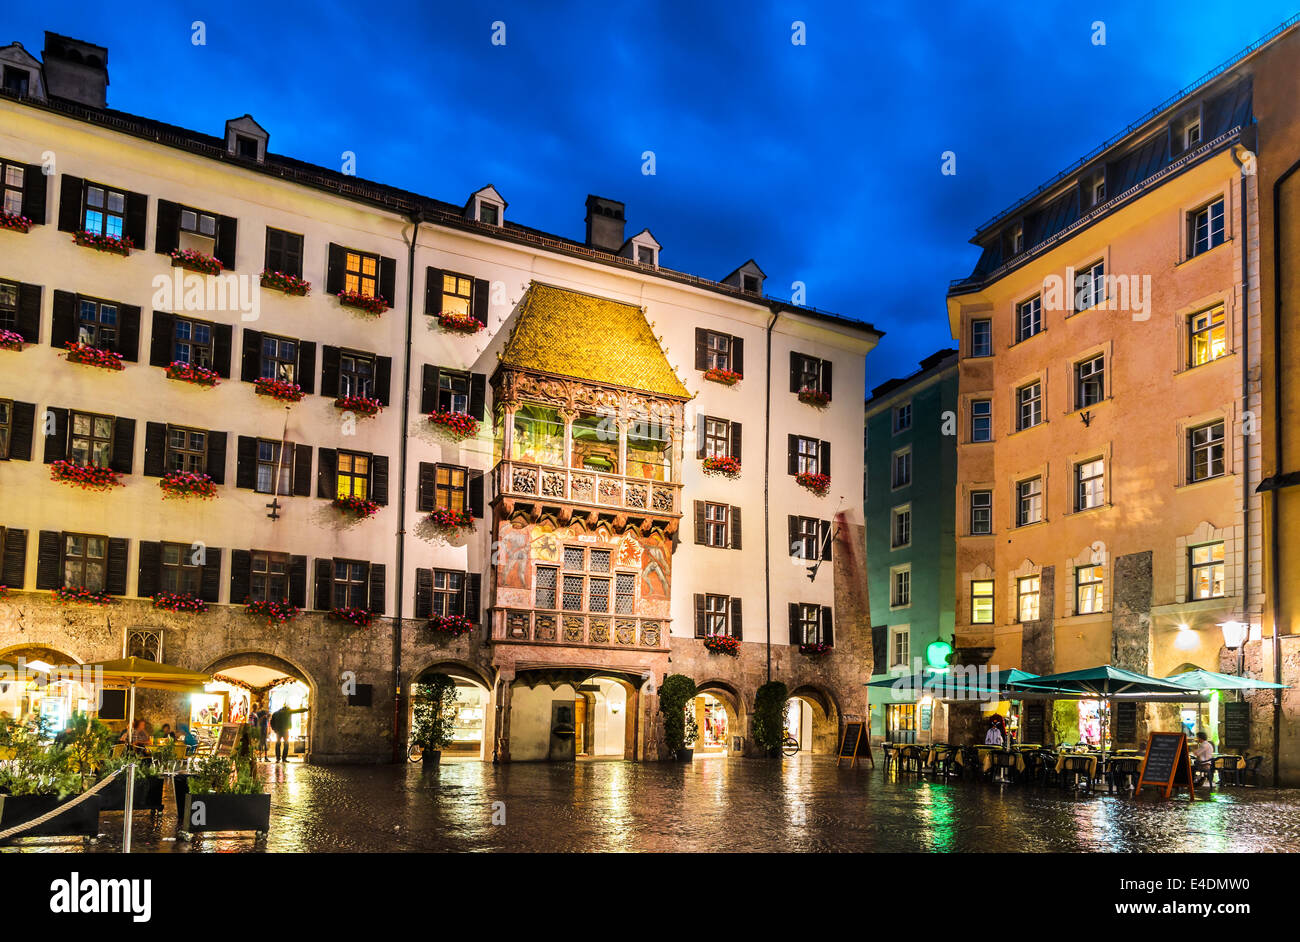 Innsbruck, Germany. Night scenery with medieval center of austrian city at twilight hour, with german architecture facades. Stock Photo